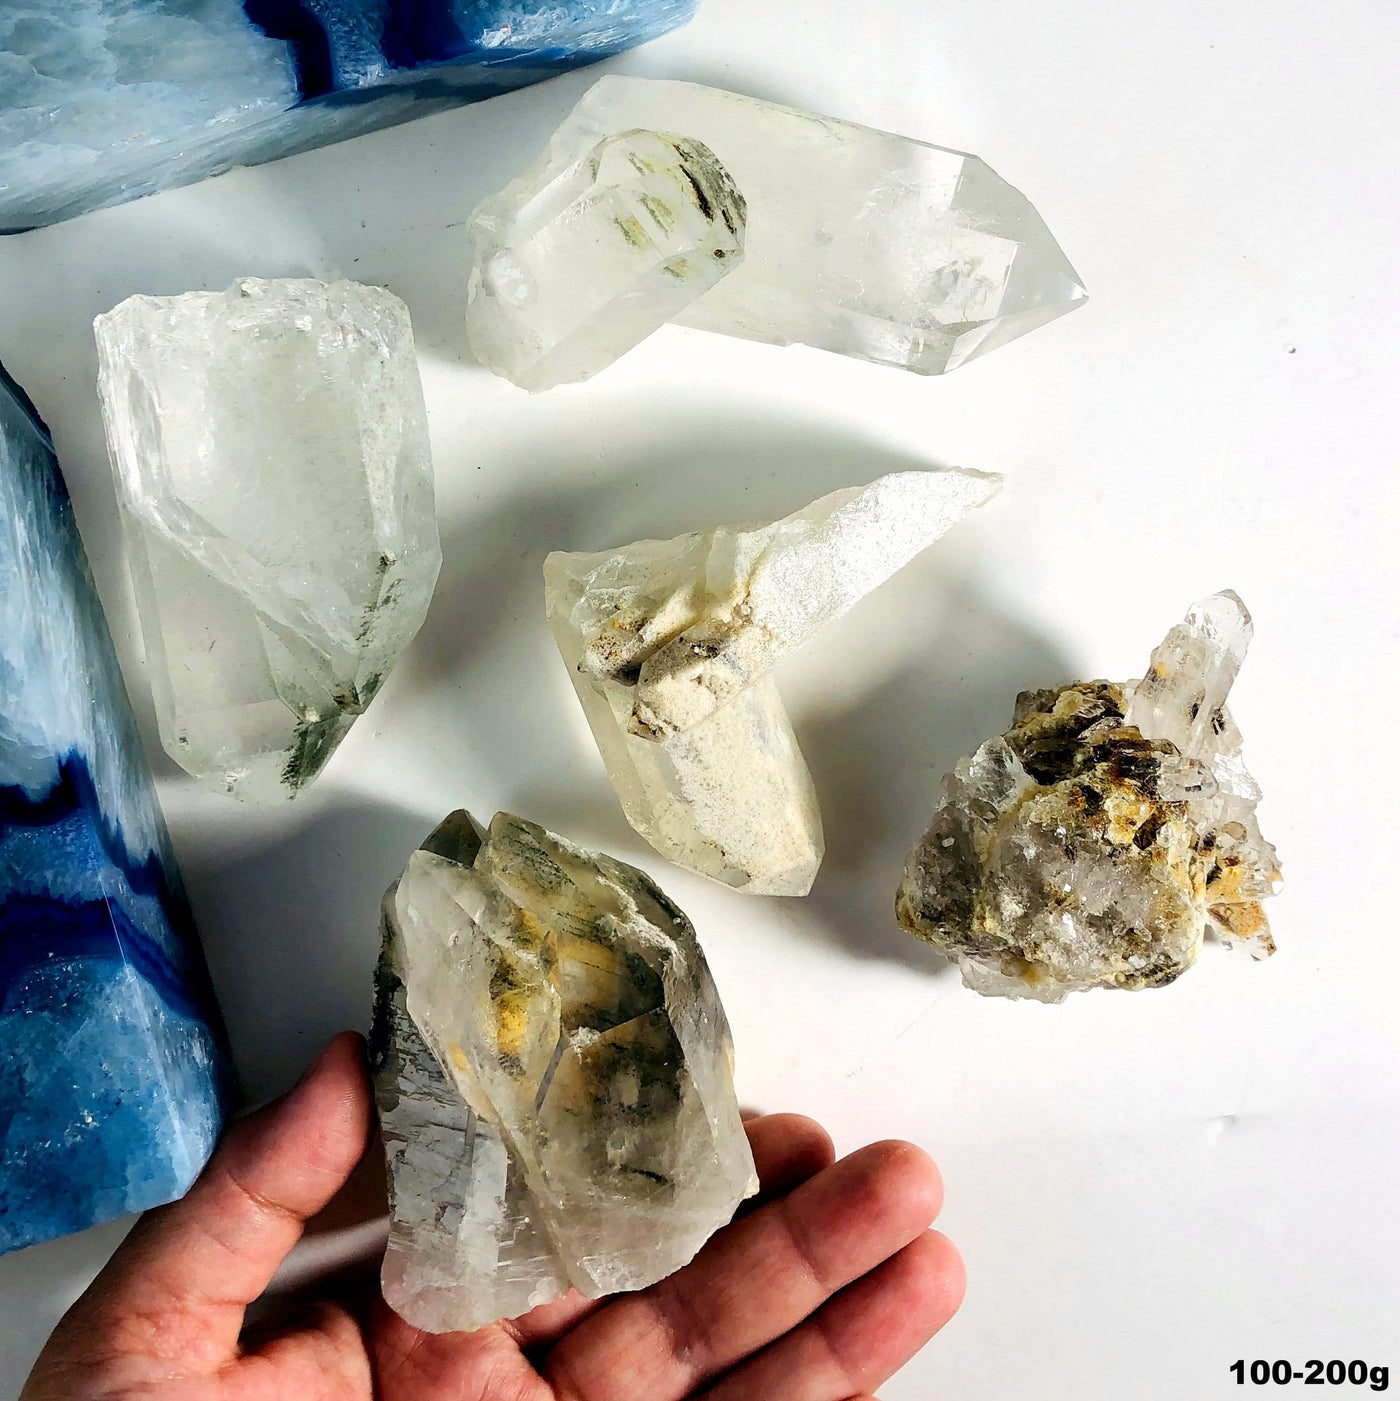 101-200g of the Crystal Quartz with Chlorite Raw Clusters in hand for size reference